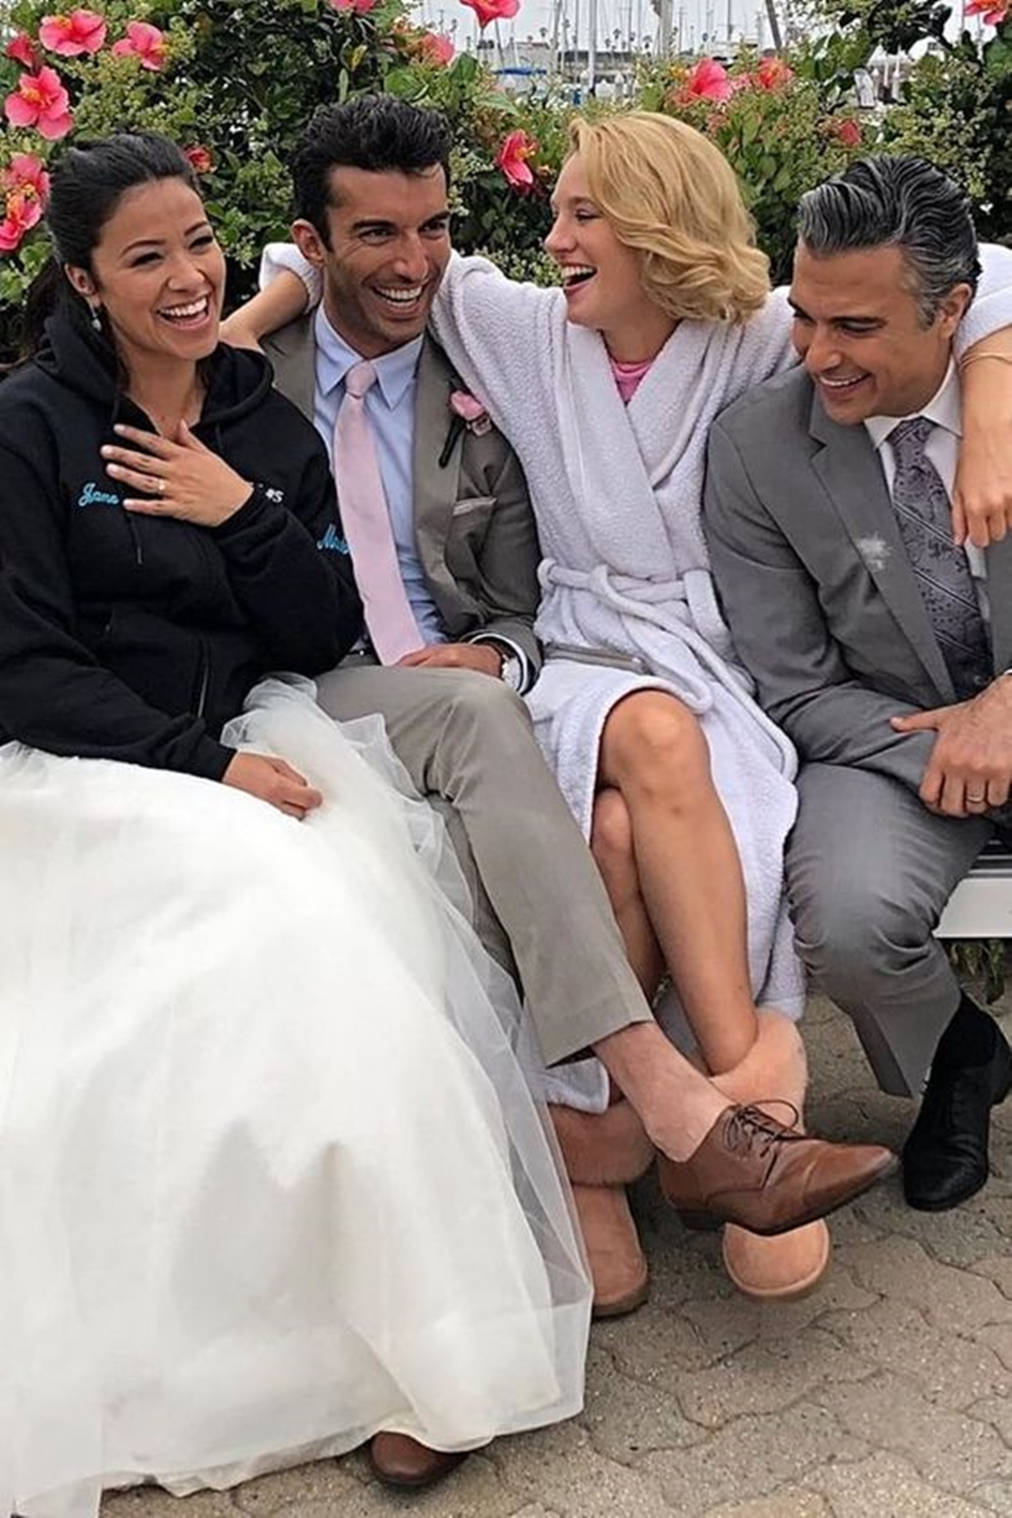 The Cast Of Jane The Virgin Smiling In Final Season Background